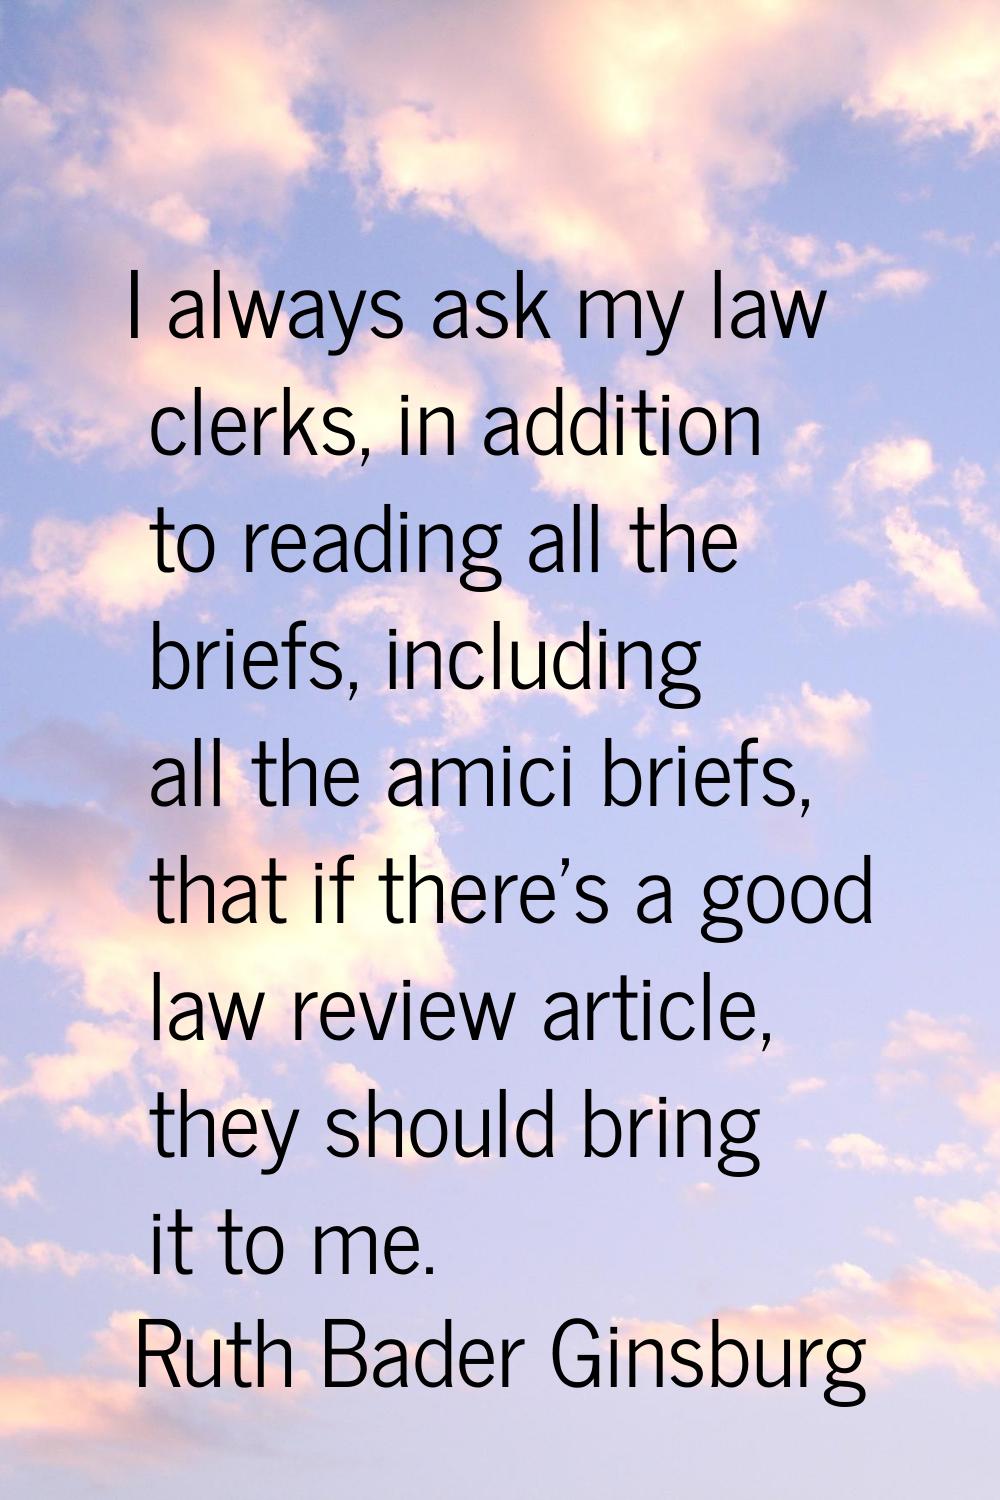 I always ask my law clerks, in addition to reading all the briefs, including all the amici briefs, 